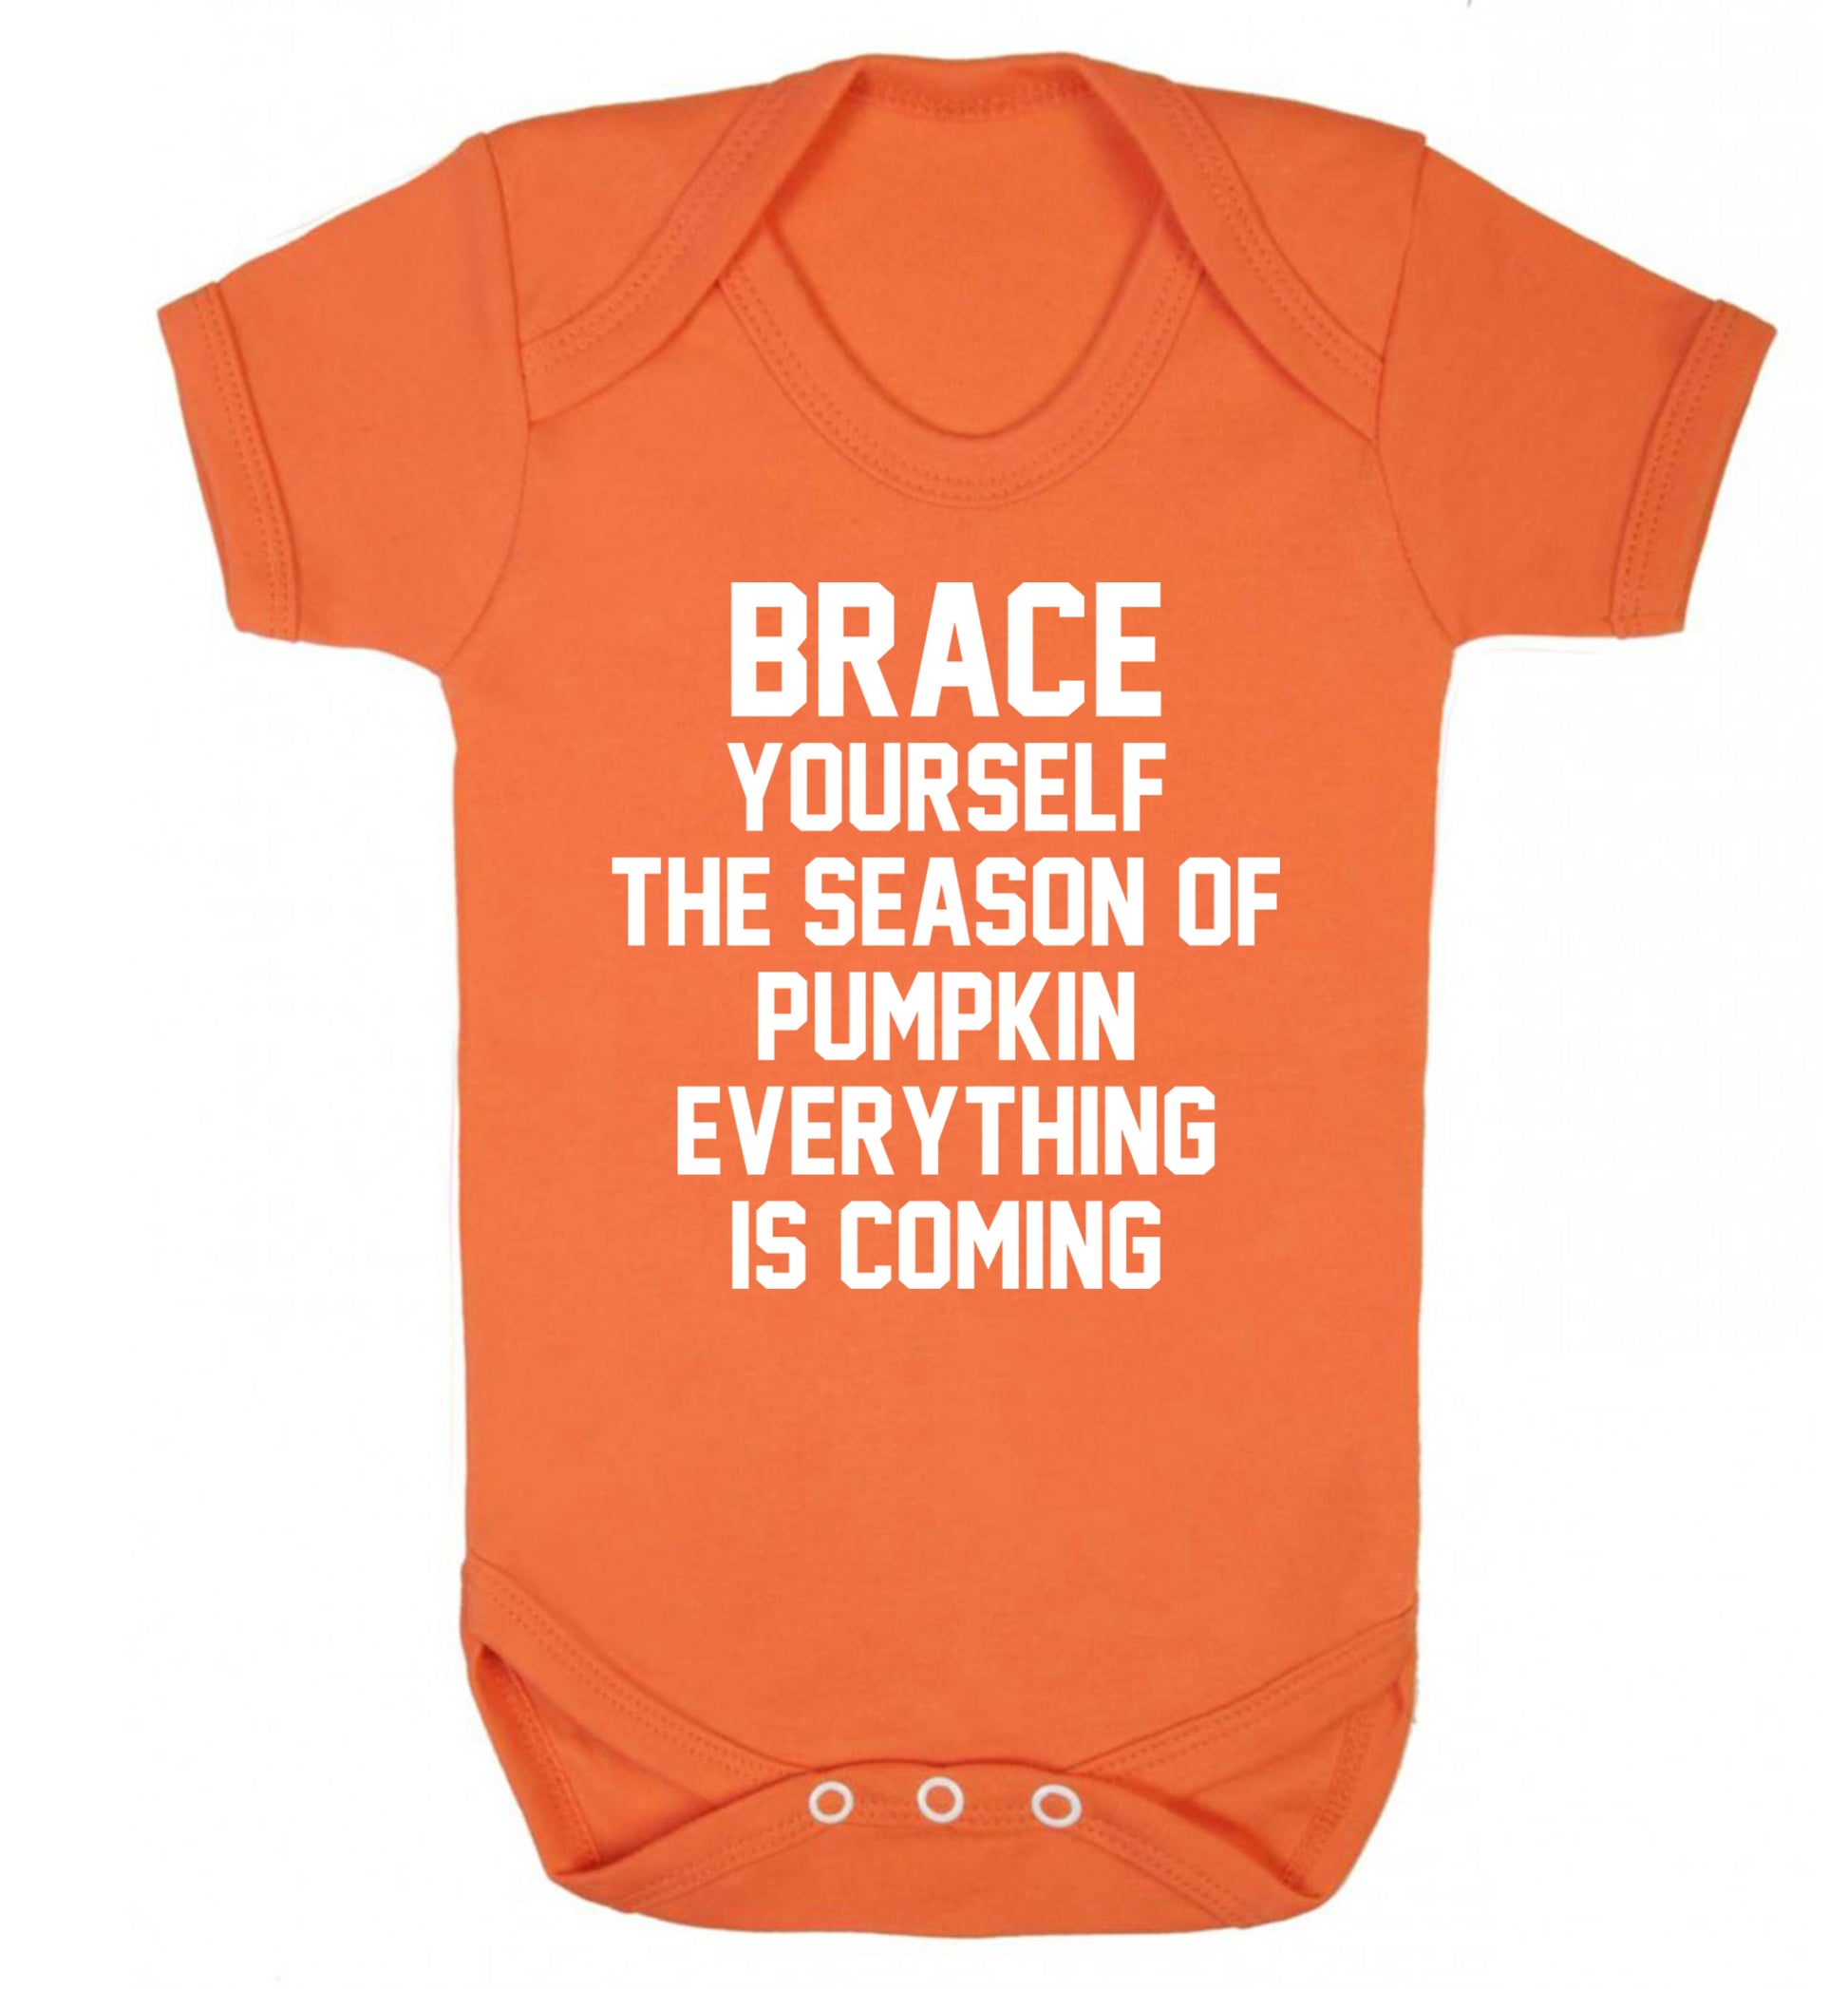 Brace yourself the season of pumpkin everything is coming Baby Vest orange 18-24 months